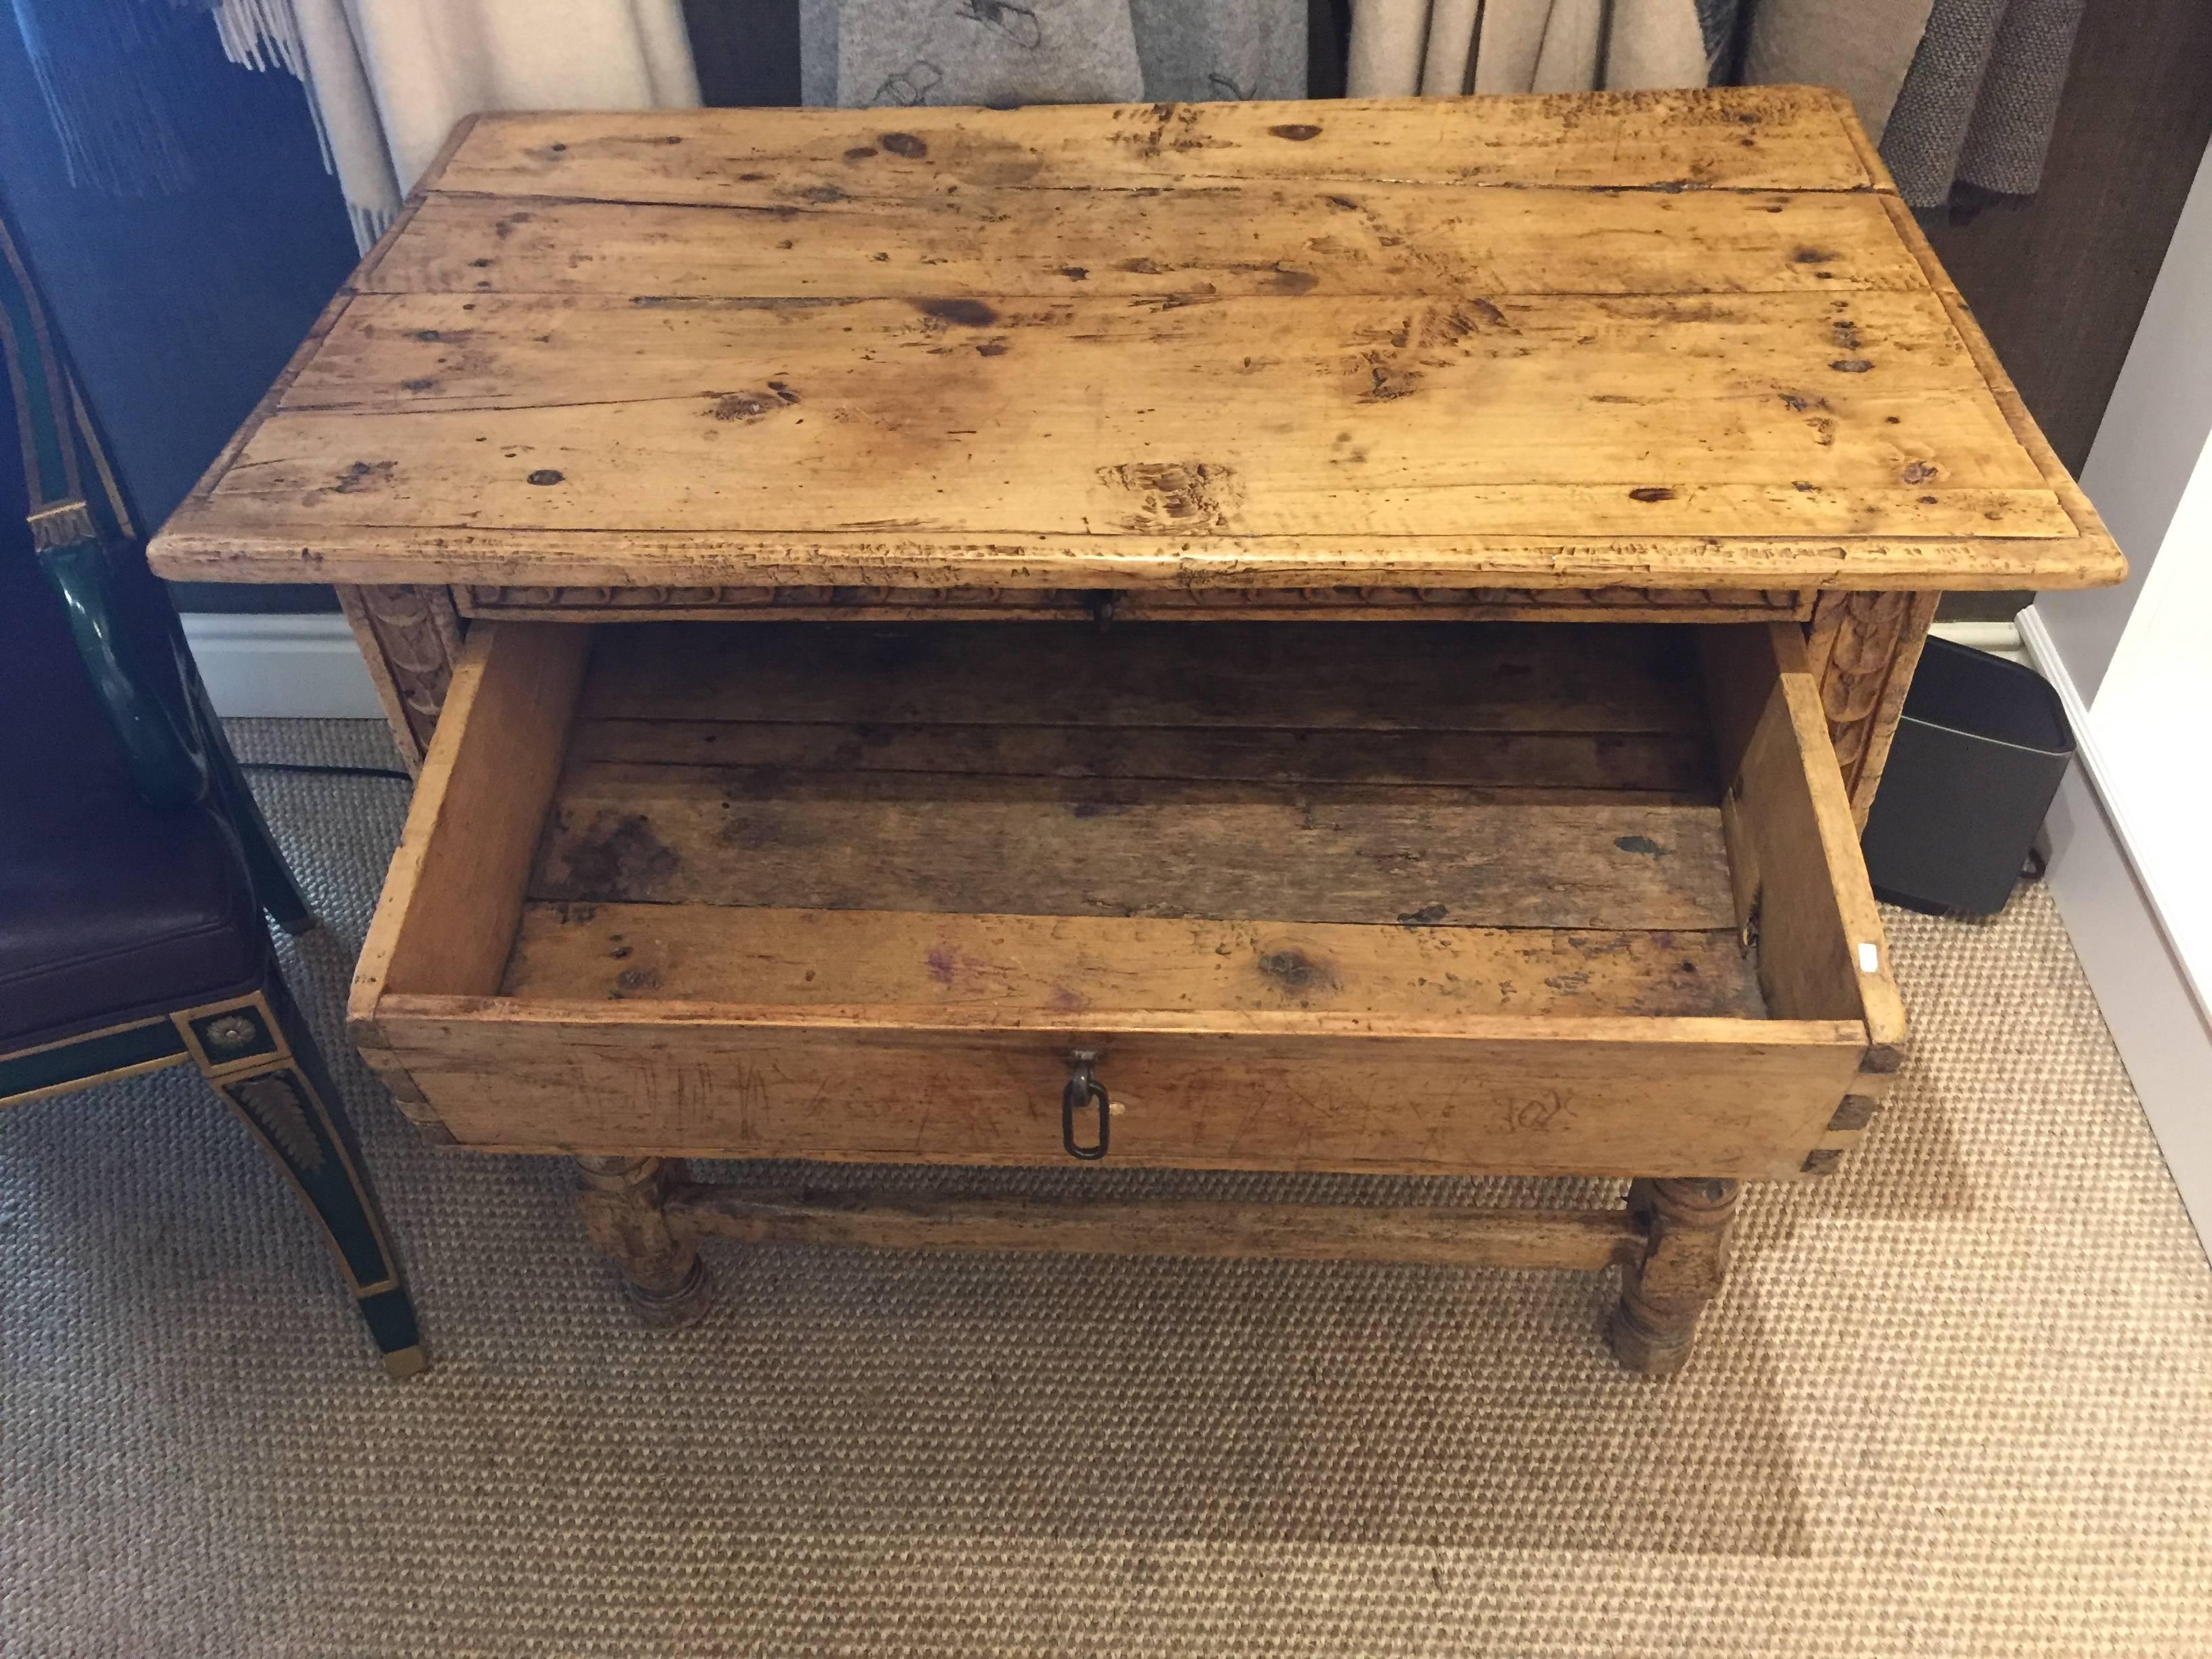 Mexican Sabino wood table with single drawer and original drawer hardware.